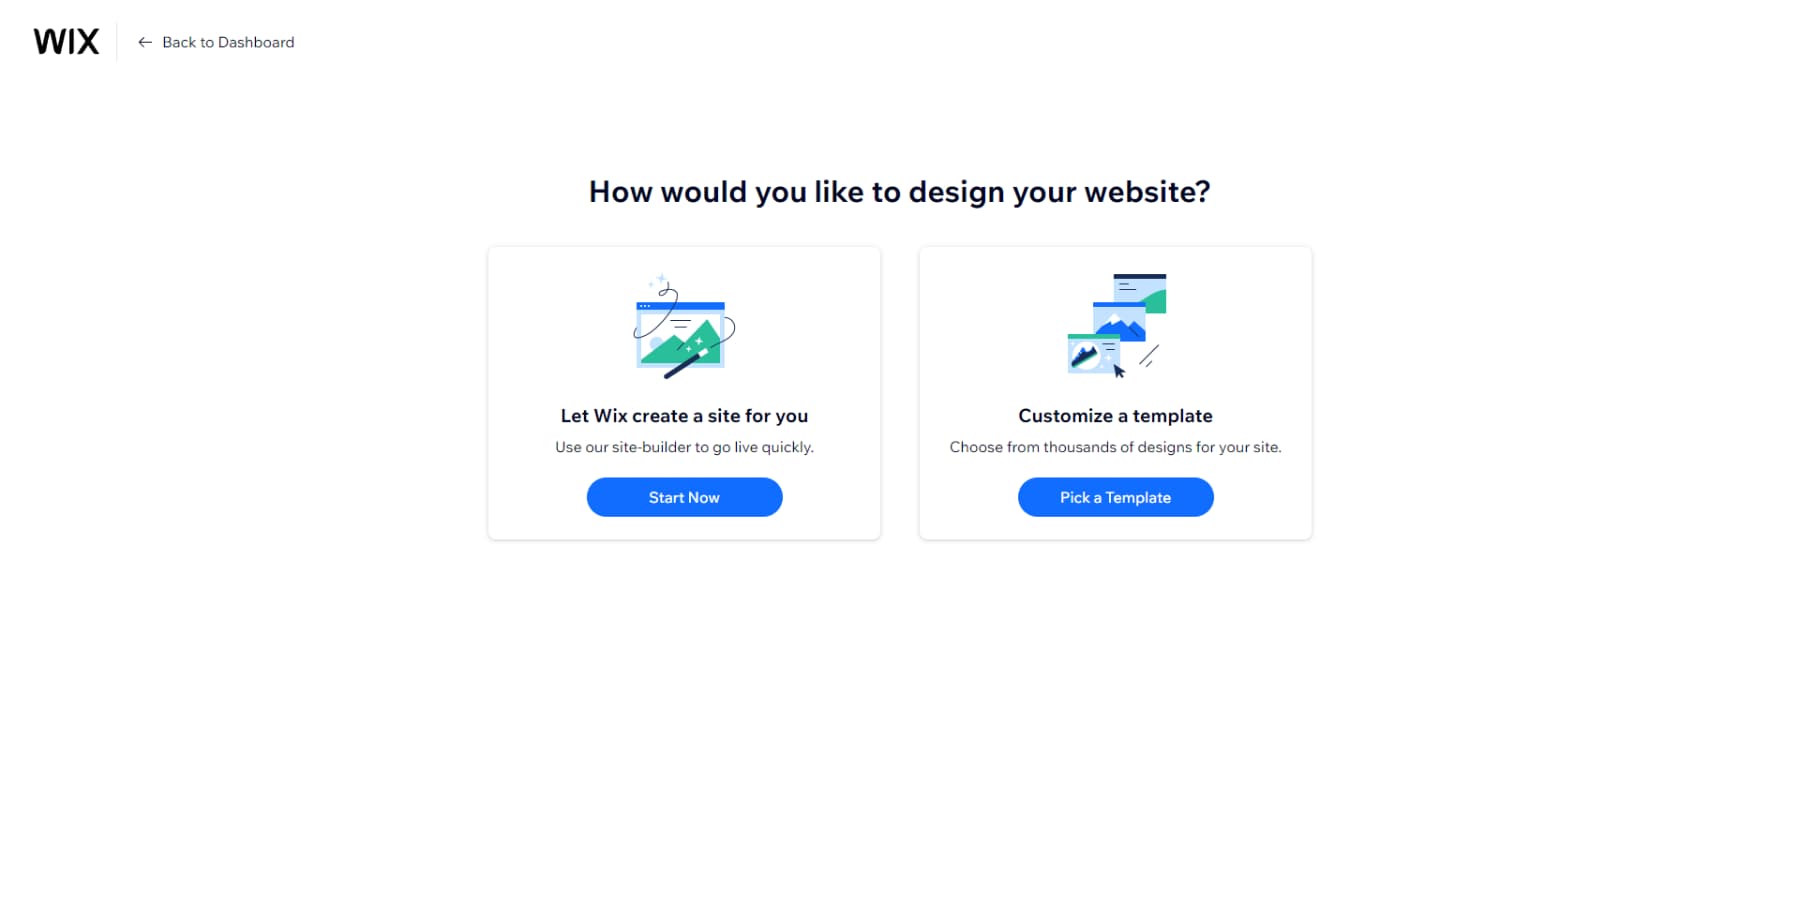 A screenshot of Wix's options to create websites